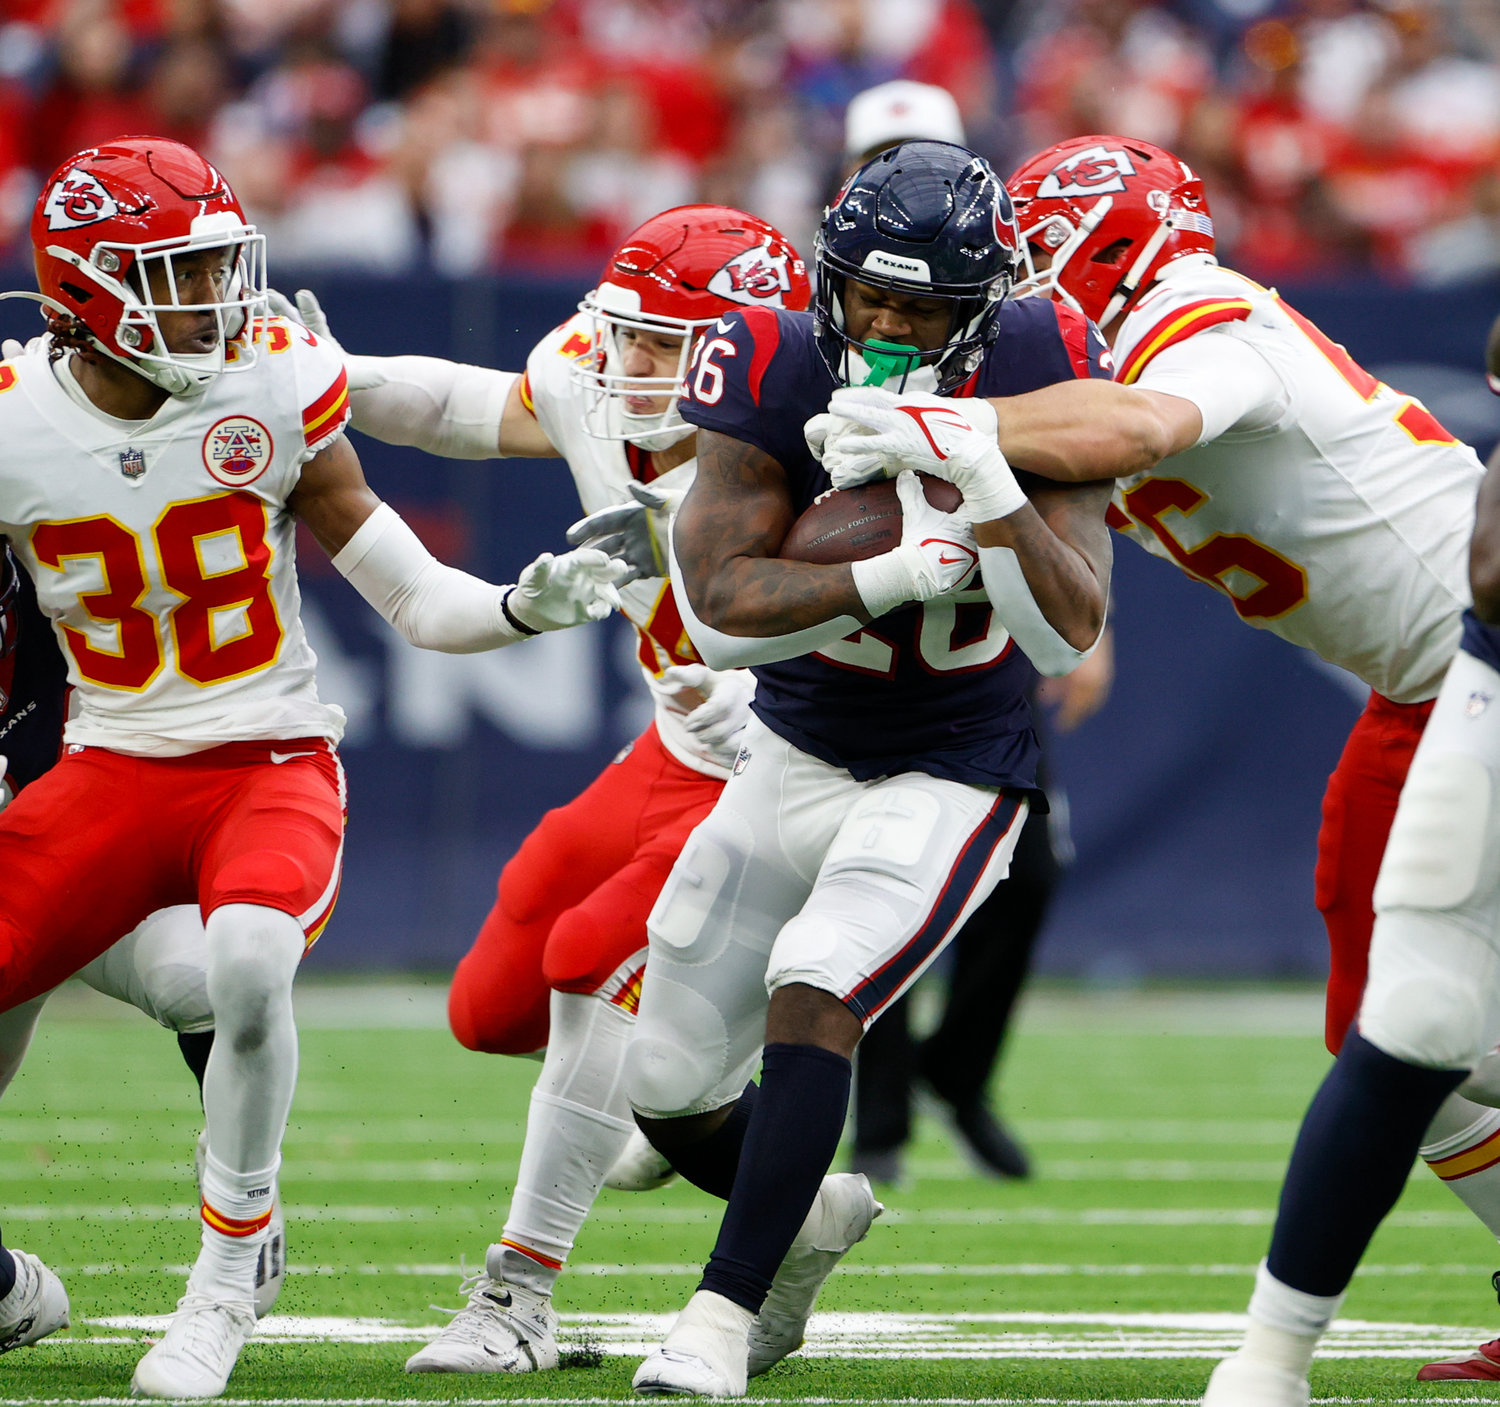 Texans falter late again in overtime loss to Chiefs